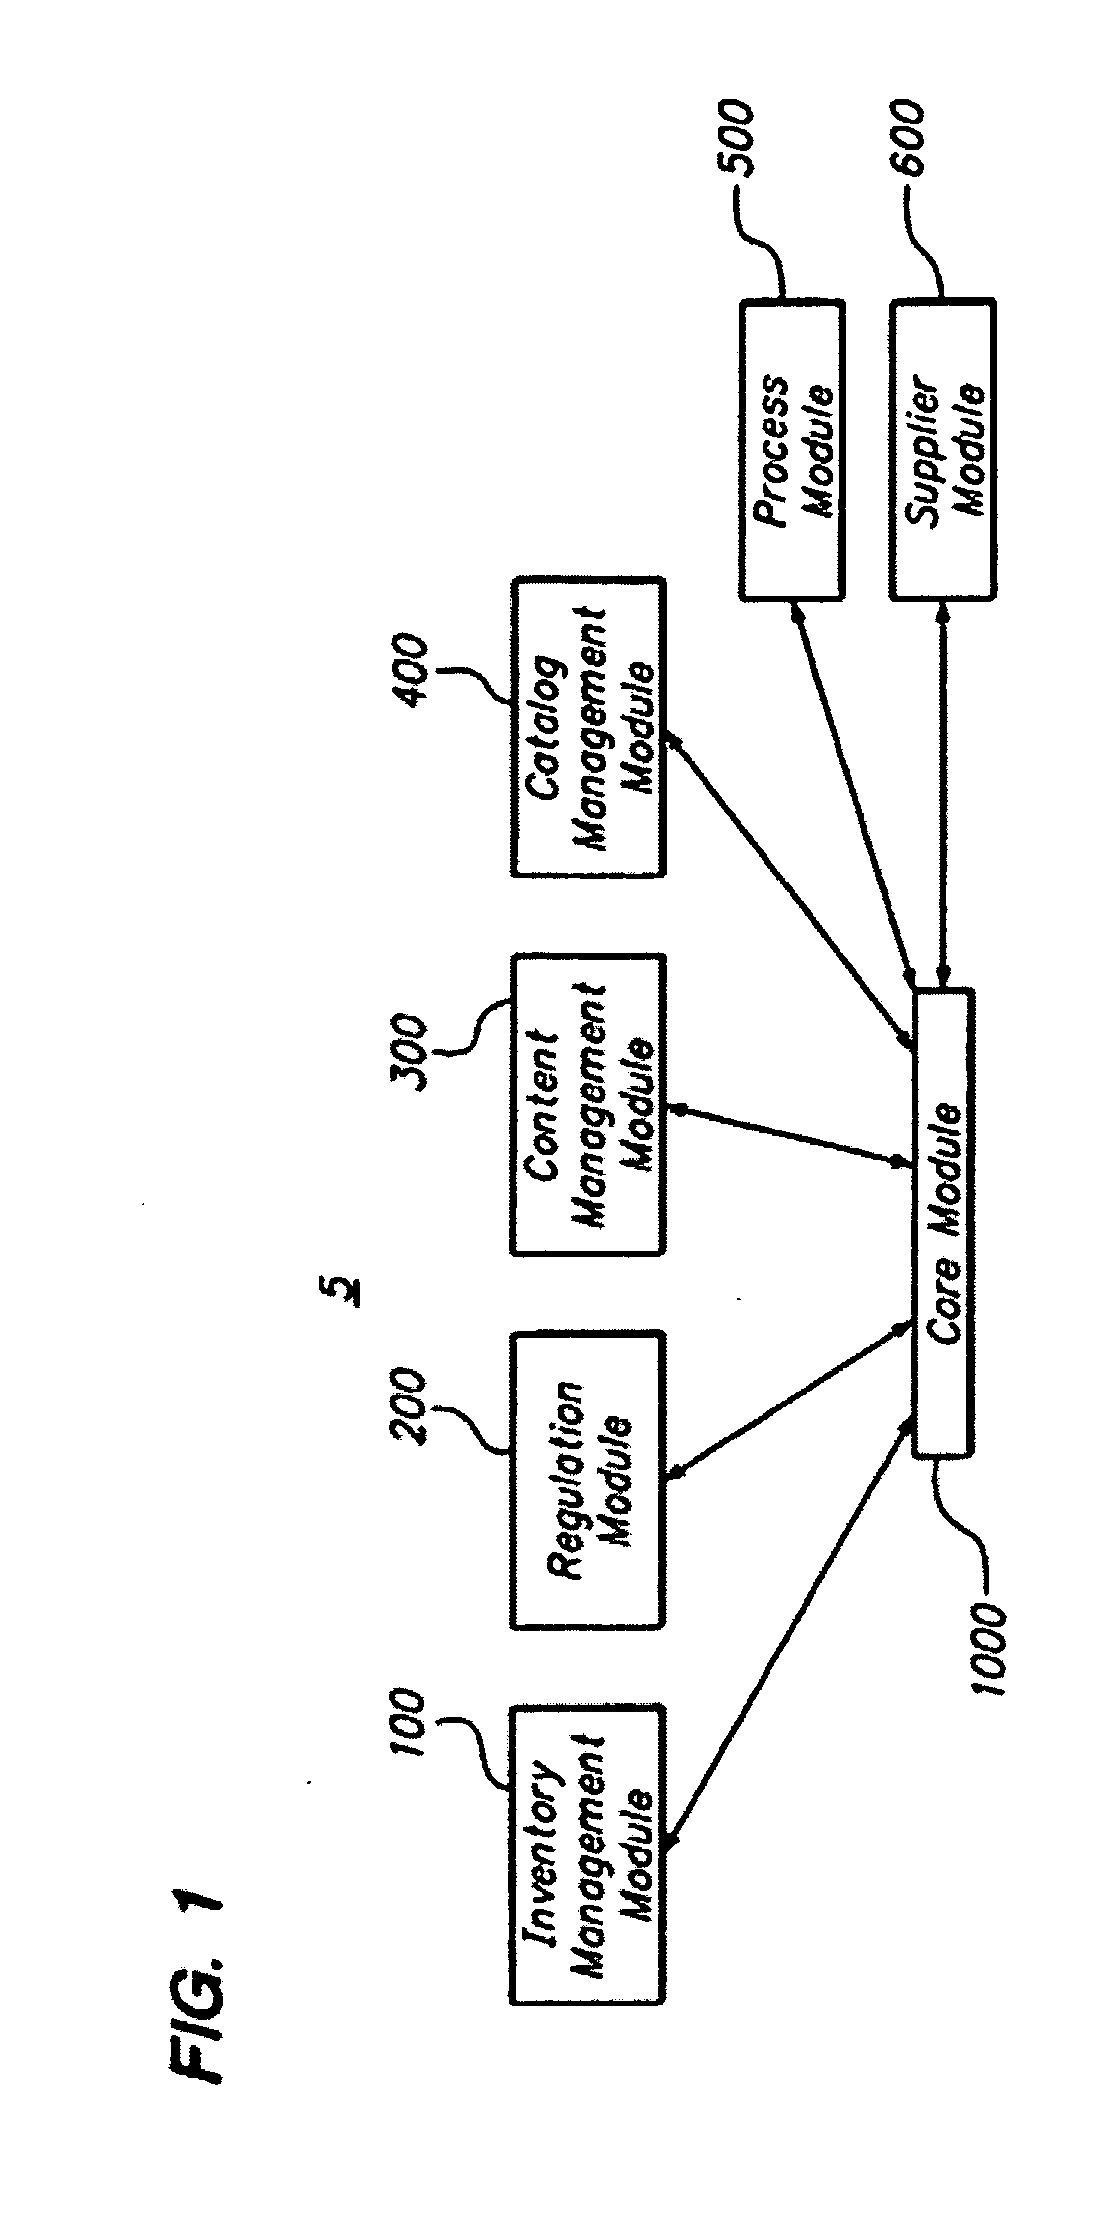 System and method for managing the development and manufacturing of a beverage